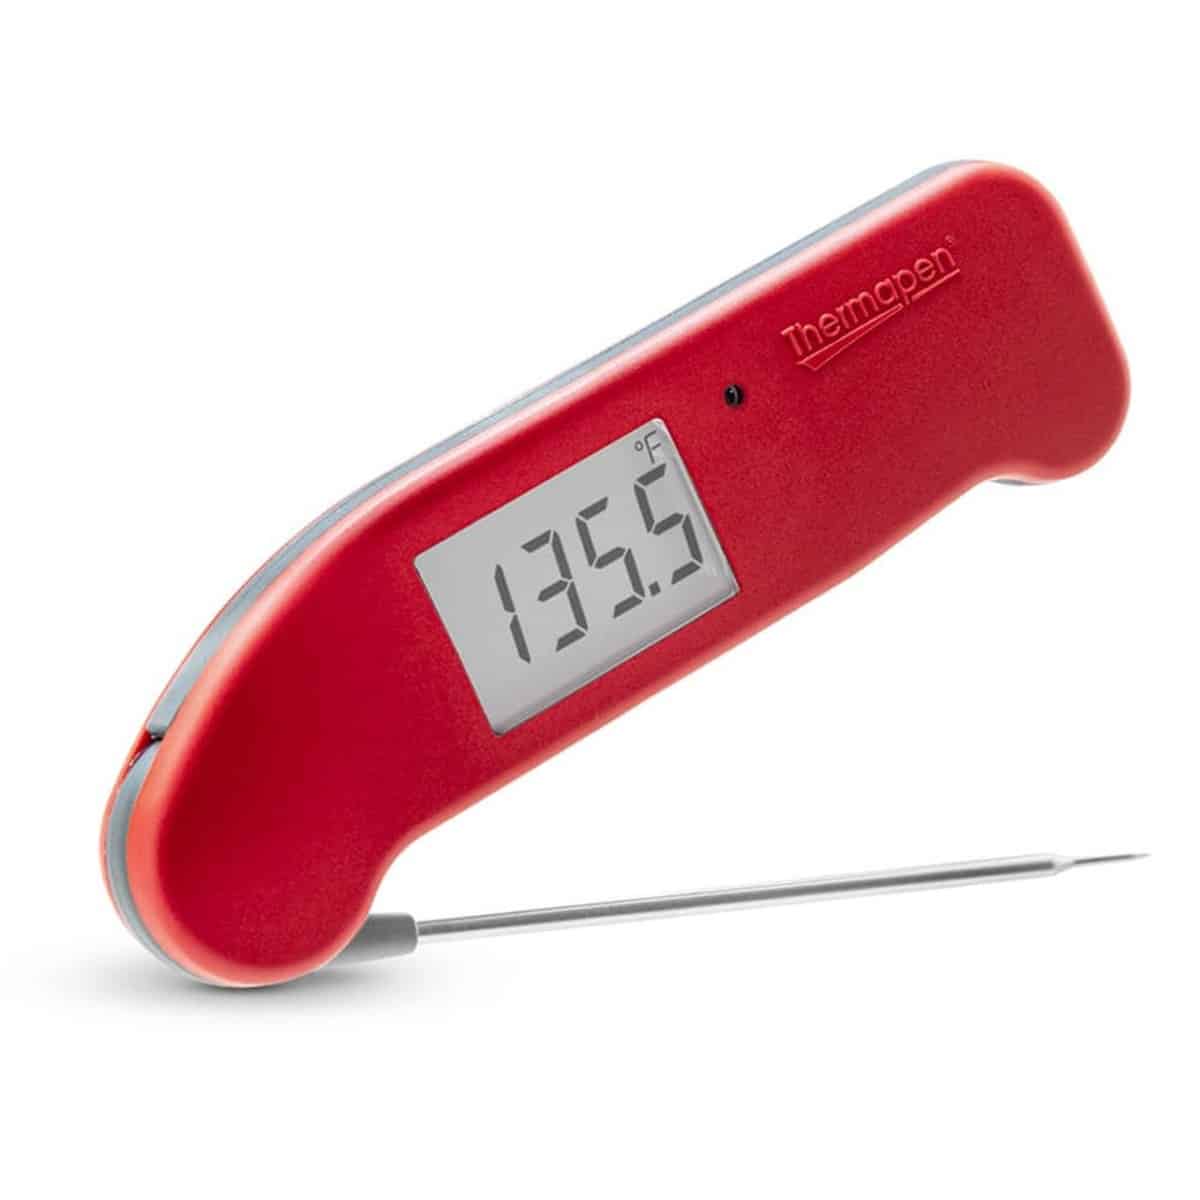 Thermoworks Thermapen one isolated on white.